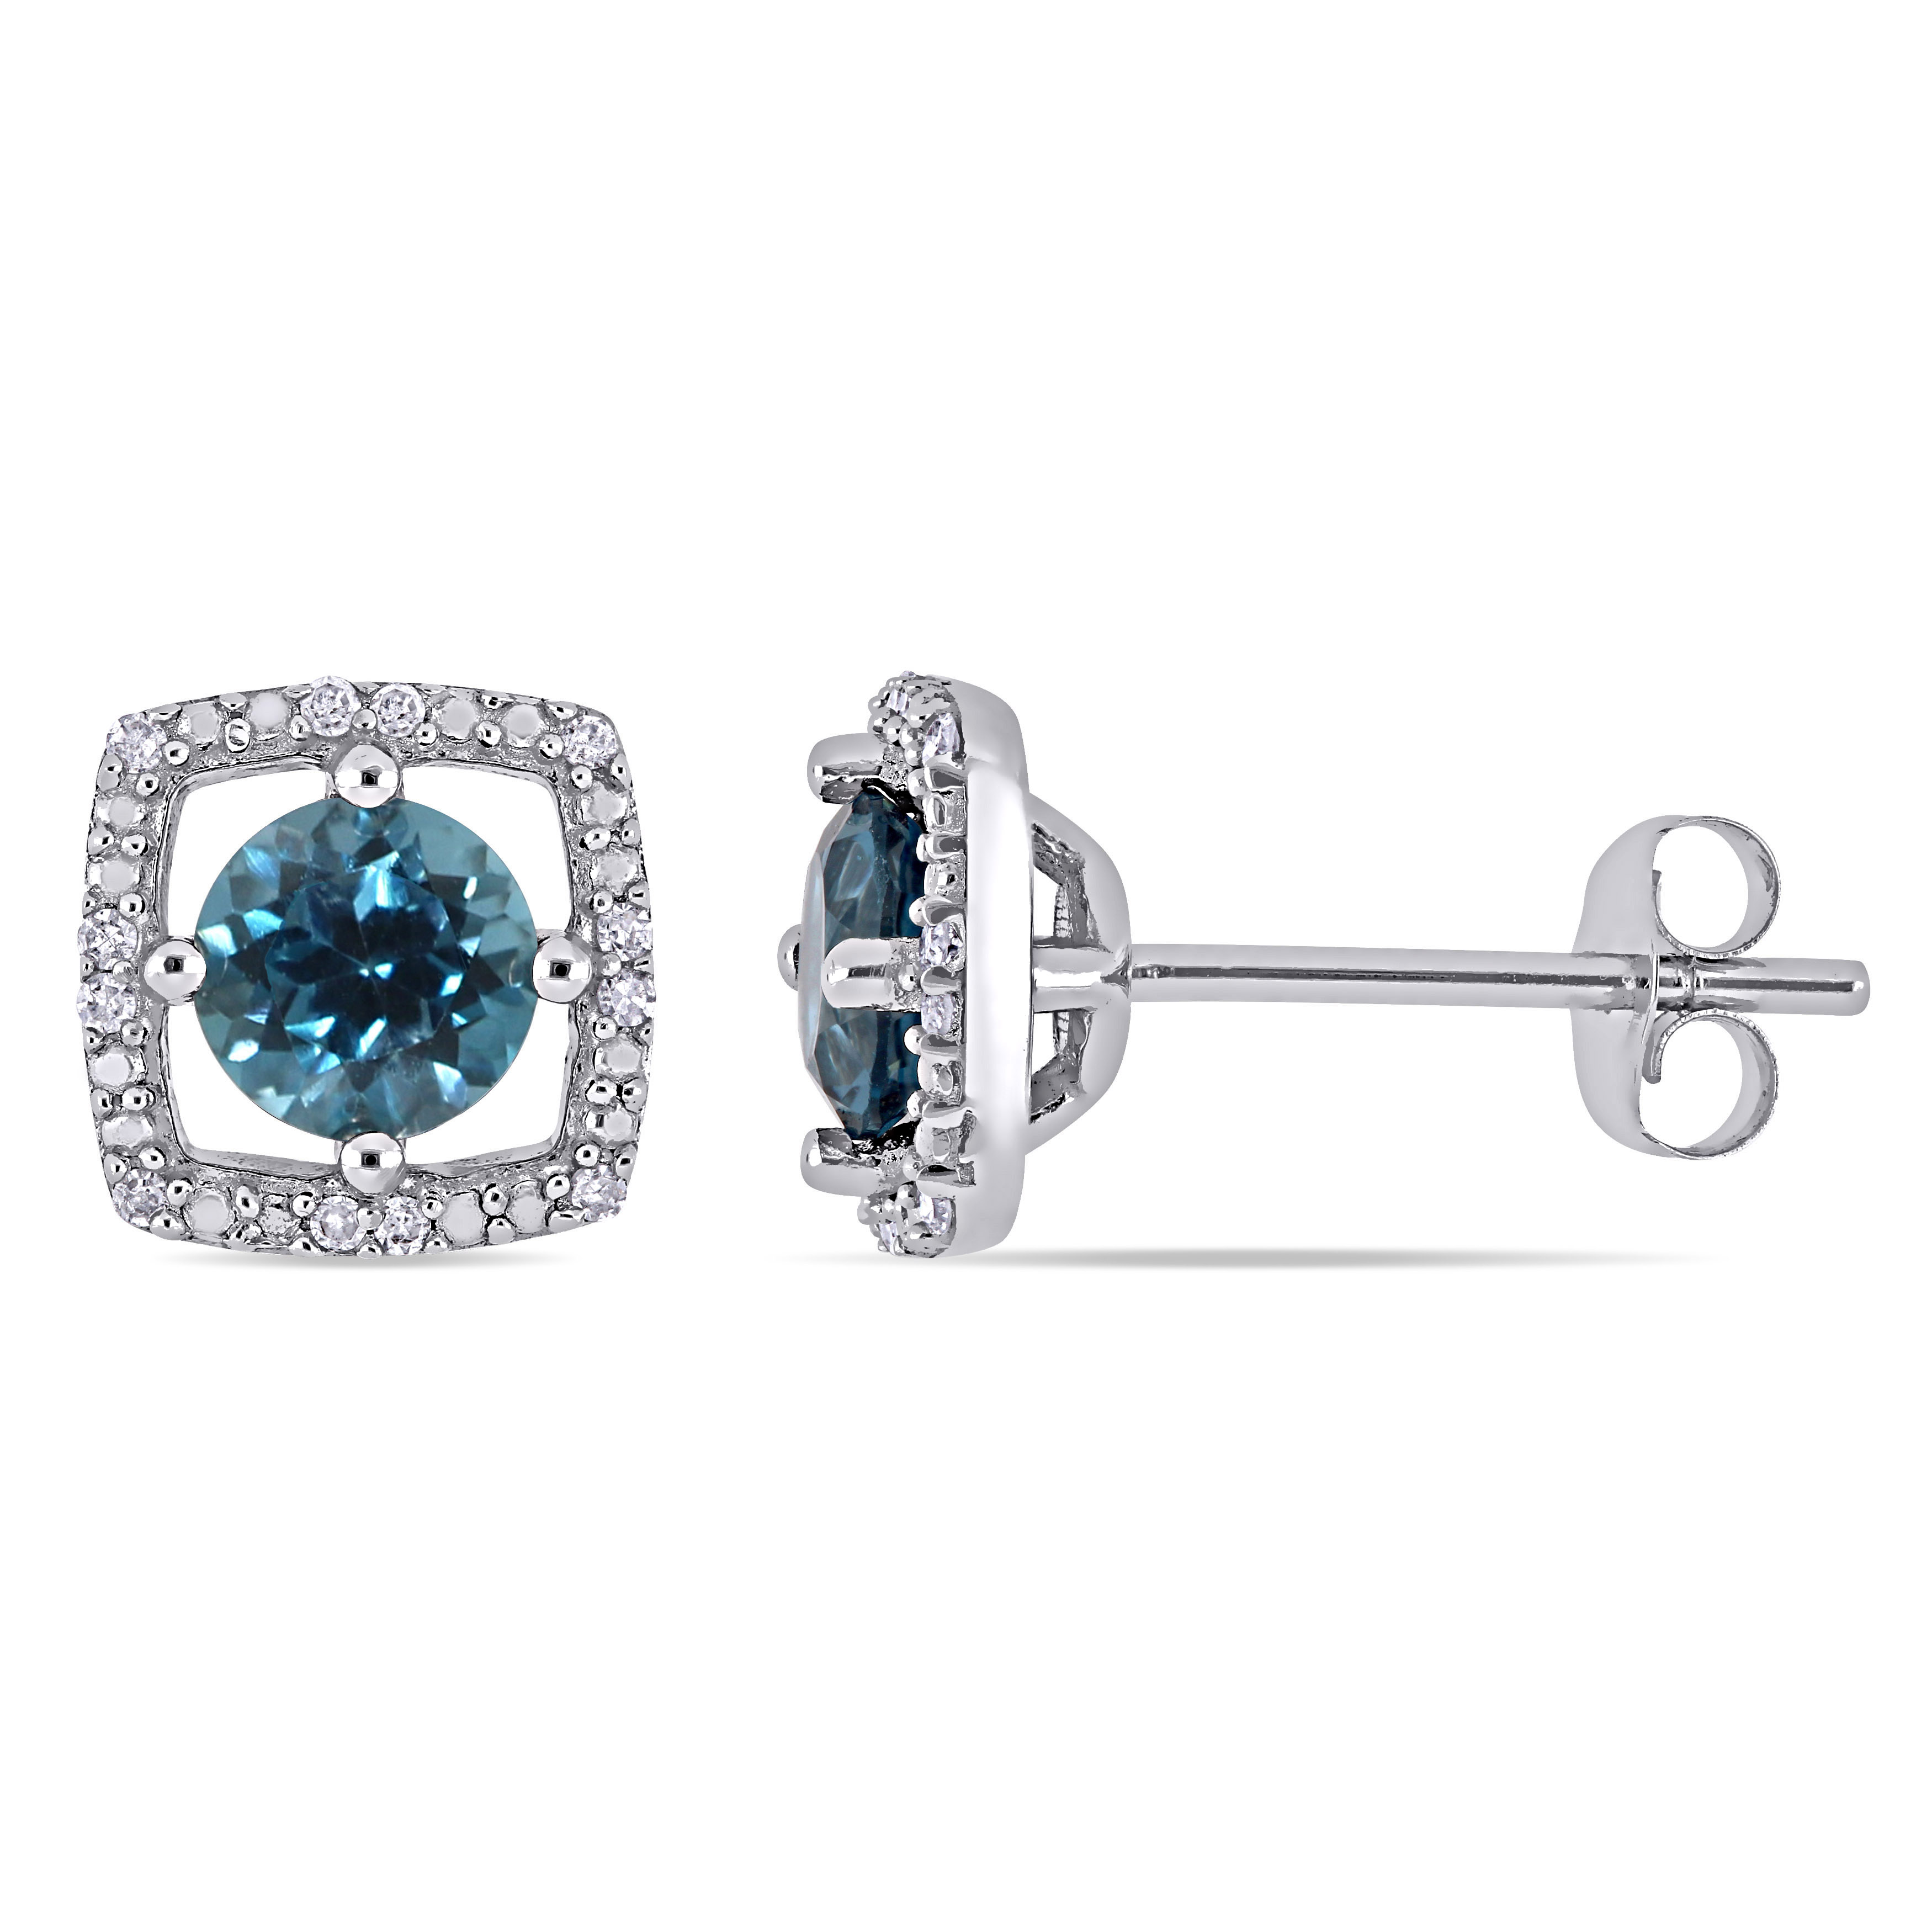 1 1/8 CT TGW London Blue Topaz and Diamond Square Stud Earrings in 10k White Gold